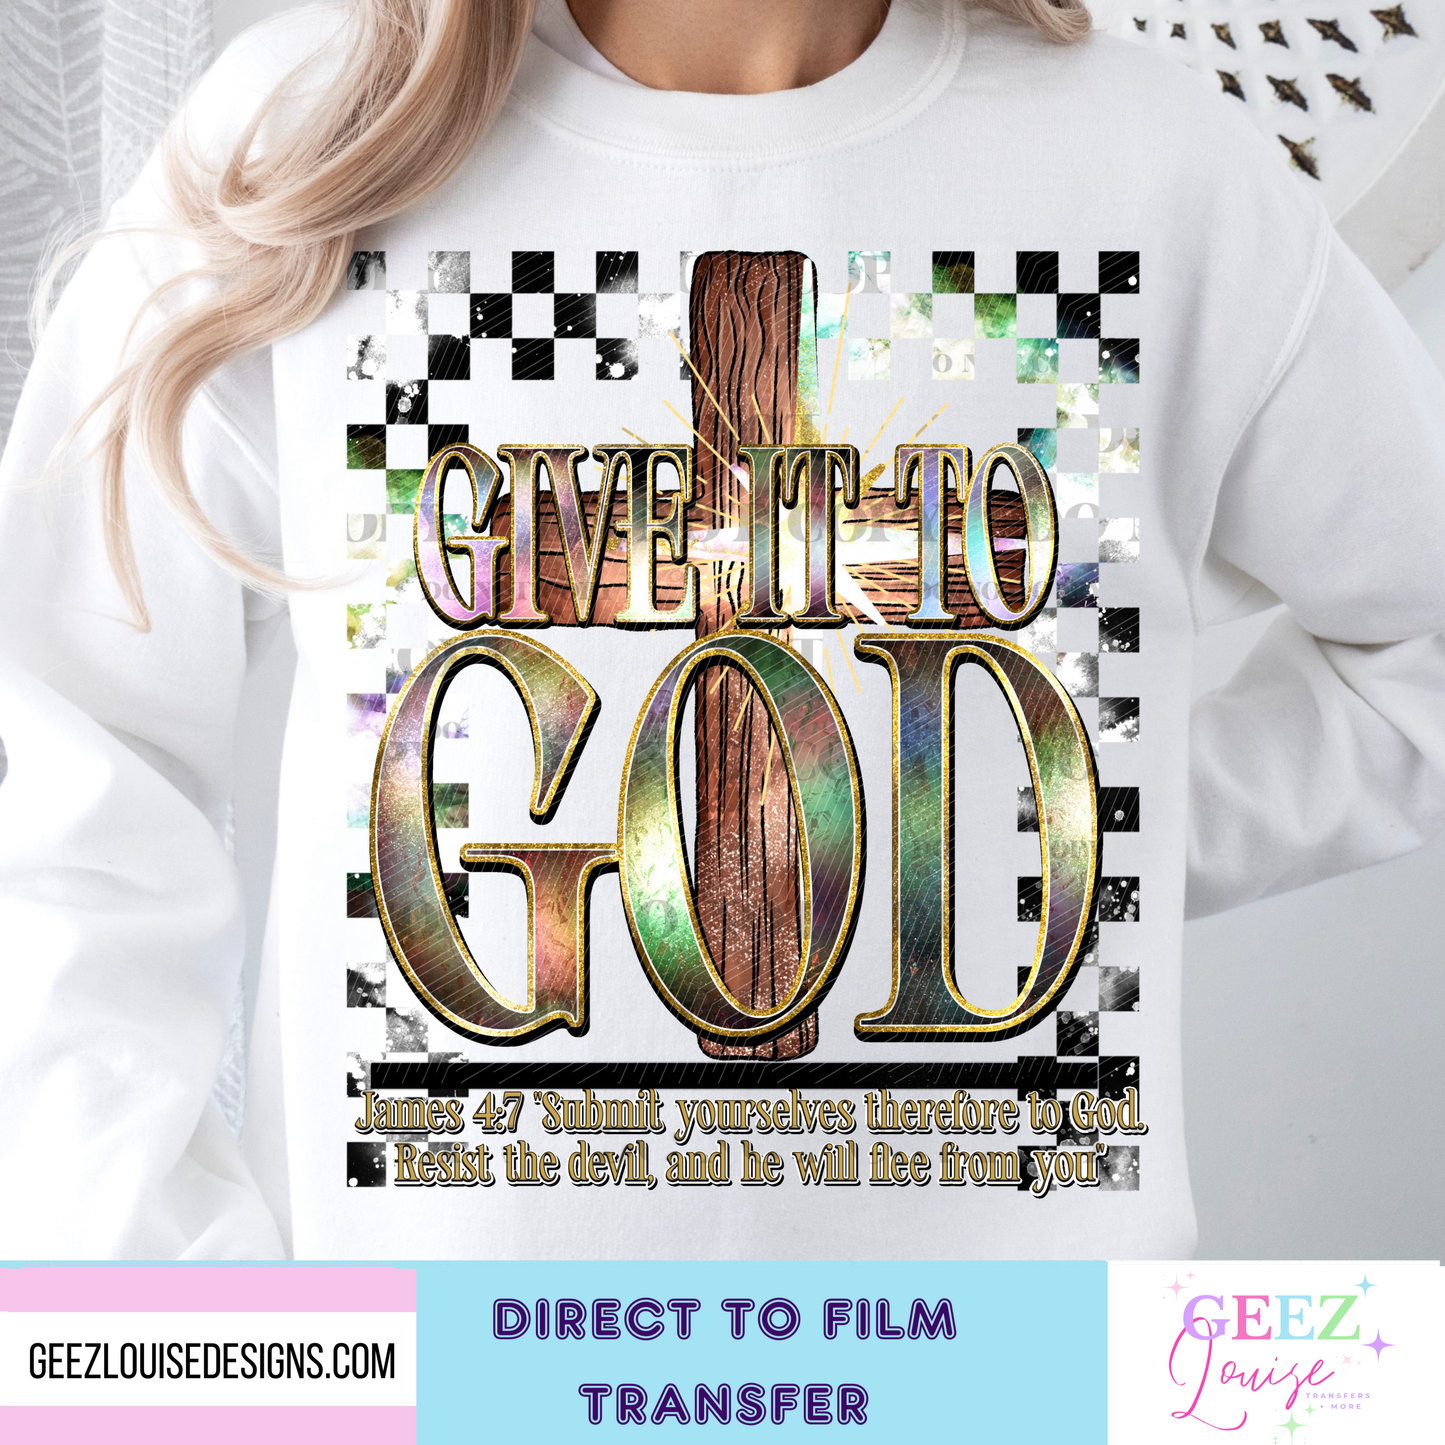 Give it to God - Direct to Film Transfer - made to order